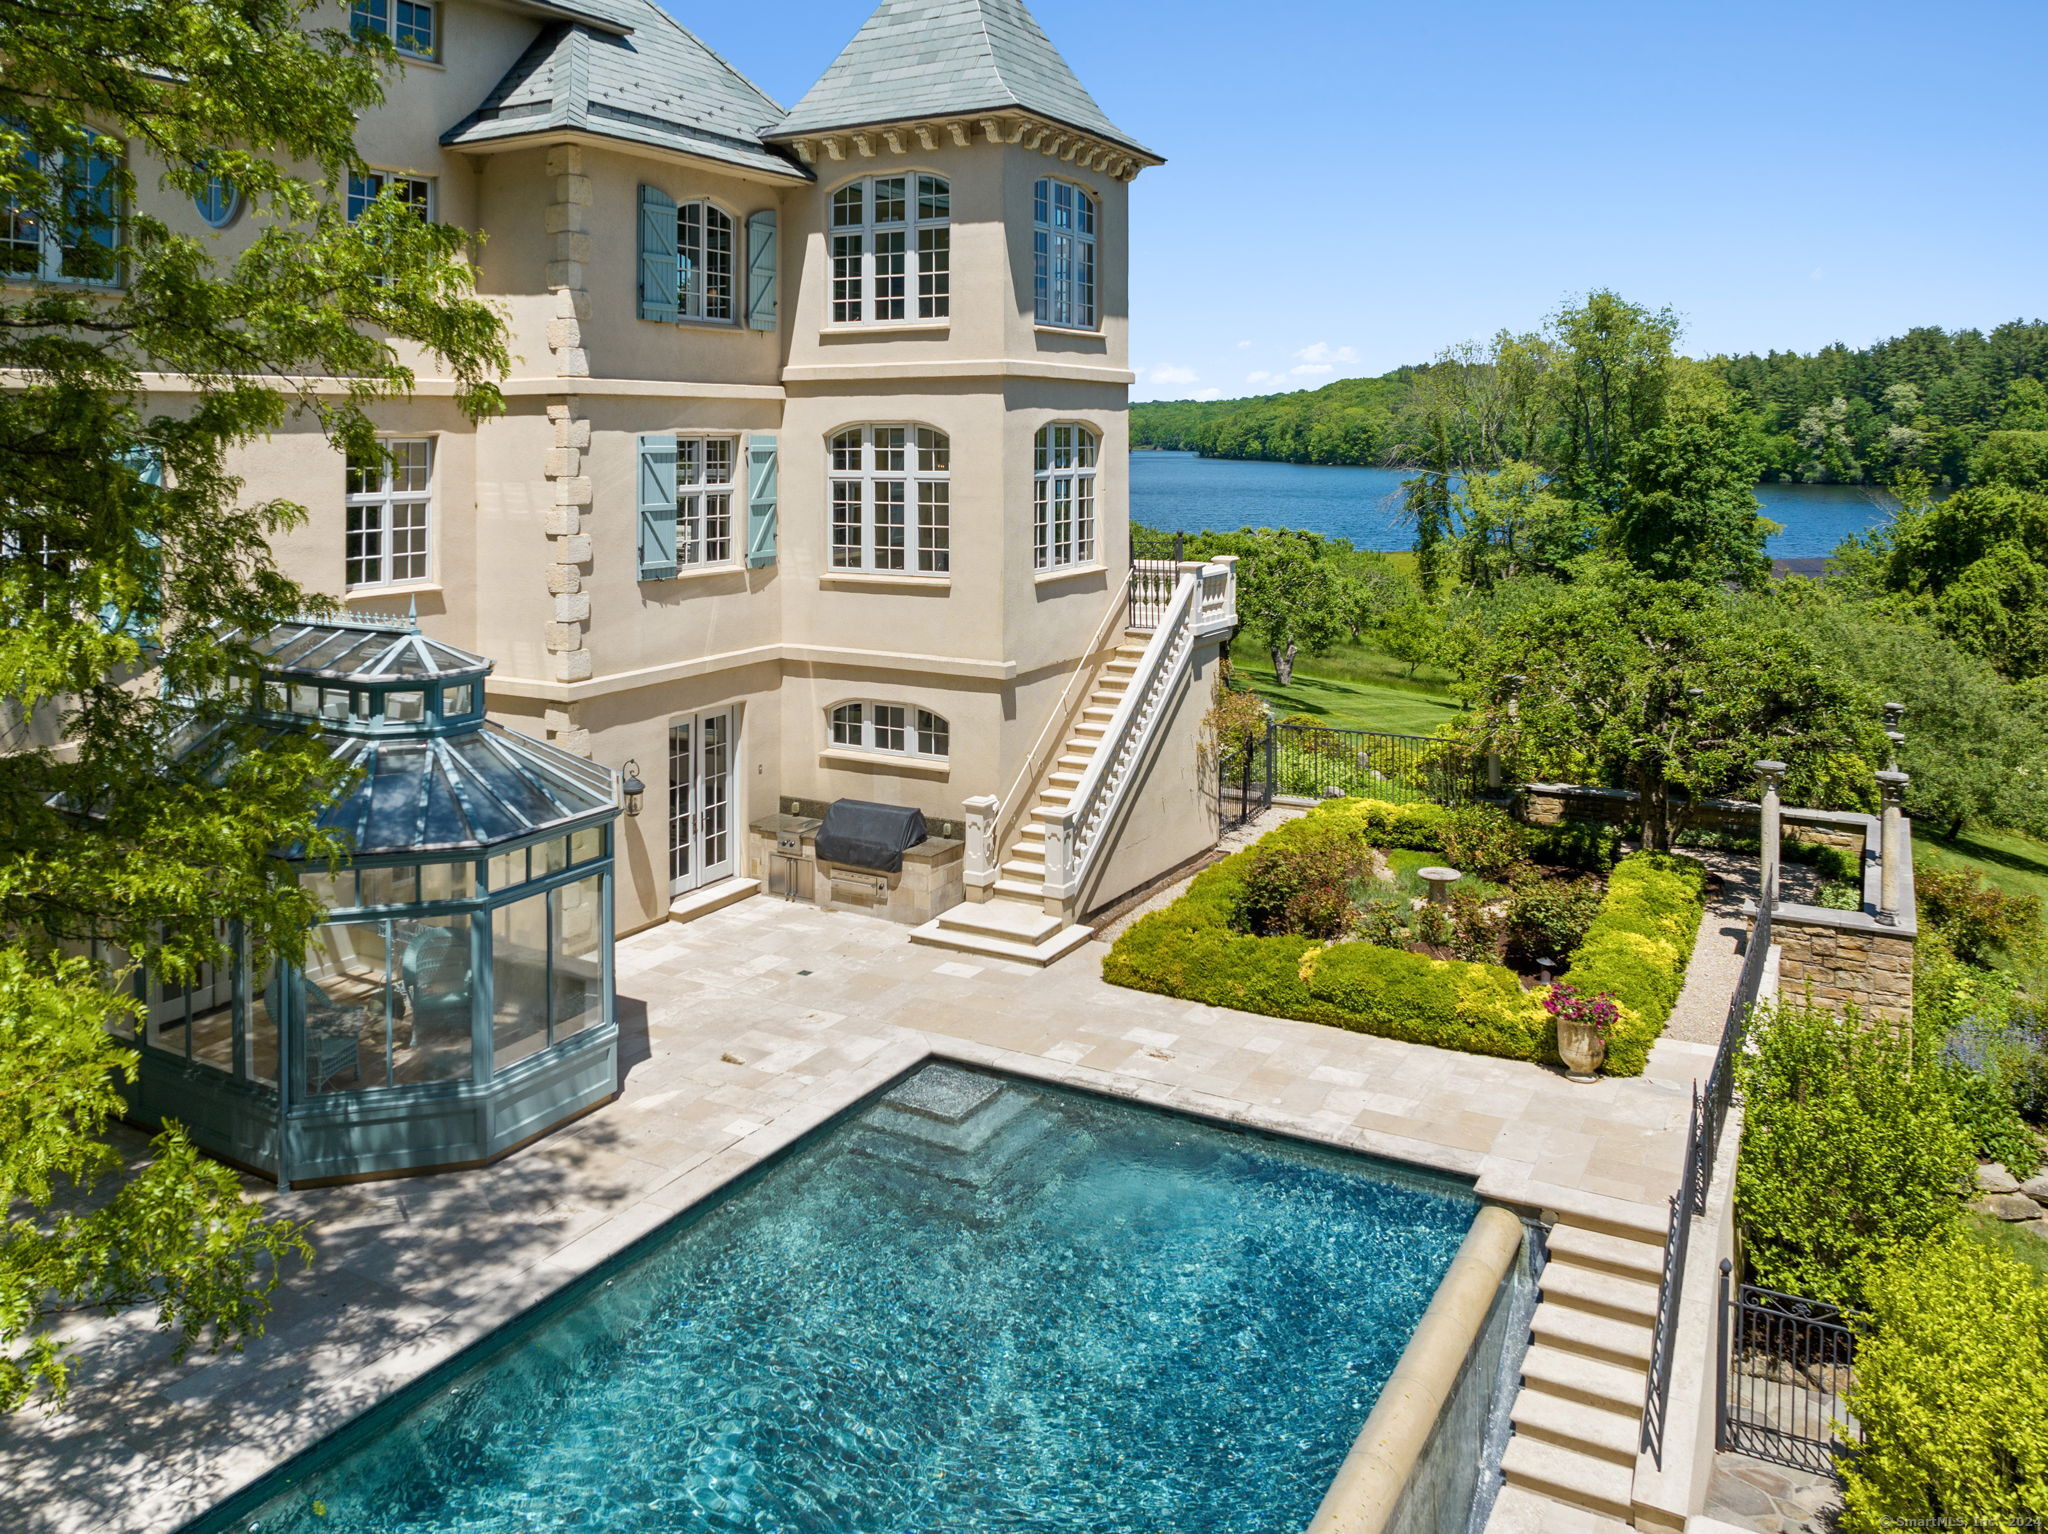 Be transported to Europe, without leaving the country! Experience breathtaking water views from this extraordinary estate nestled on 2.29 acres in South Wilton. Embracing European elegance, this coveted Nod Hill residence exudes luxury & meticulous craftsmanship from its slate roof down to its pool-side solarium. With soaring ceilings, limestone fireplaces, custom millwork & the finest materials imported from France & Italy, every detail reflects unparalleled quality that would be hard to duplicate today. Spanning 4 finished floors, this home offers space for all to enjoy–from quiet, cozy gatherings to grand parties. Entertain with ease! The light filled interior seamlessly blends modern comfort w/timeless elegance. The chef’s kitchen features top of the line appliances, pantry, fireplace, dining area & French doors opening to the terrace. The 2-story family room/library w/stunning fireplace offers a cozy space to enjoy quiet time w/a book or media. The primary suite provides a private oasis w/sitting room, luxe ensuite bath & fireplace. The piece de resistance is the stunning property…terraces overlooking Streets Pond, patios by the infinity edge pool, atrium, manicured gardens w/fruit trees & sweeping lawn. The pool “house” w/kitchenette, full bath & space to lounge, is perfect for hosting summer gatherings. With the allure of water views & gracious sophistication, this home offers a sublime lifestyle. Don’t miss the opportunity to own this exceptional piece of paradise.